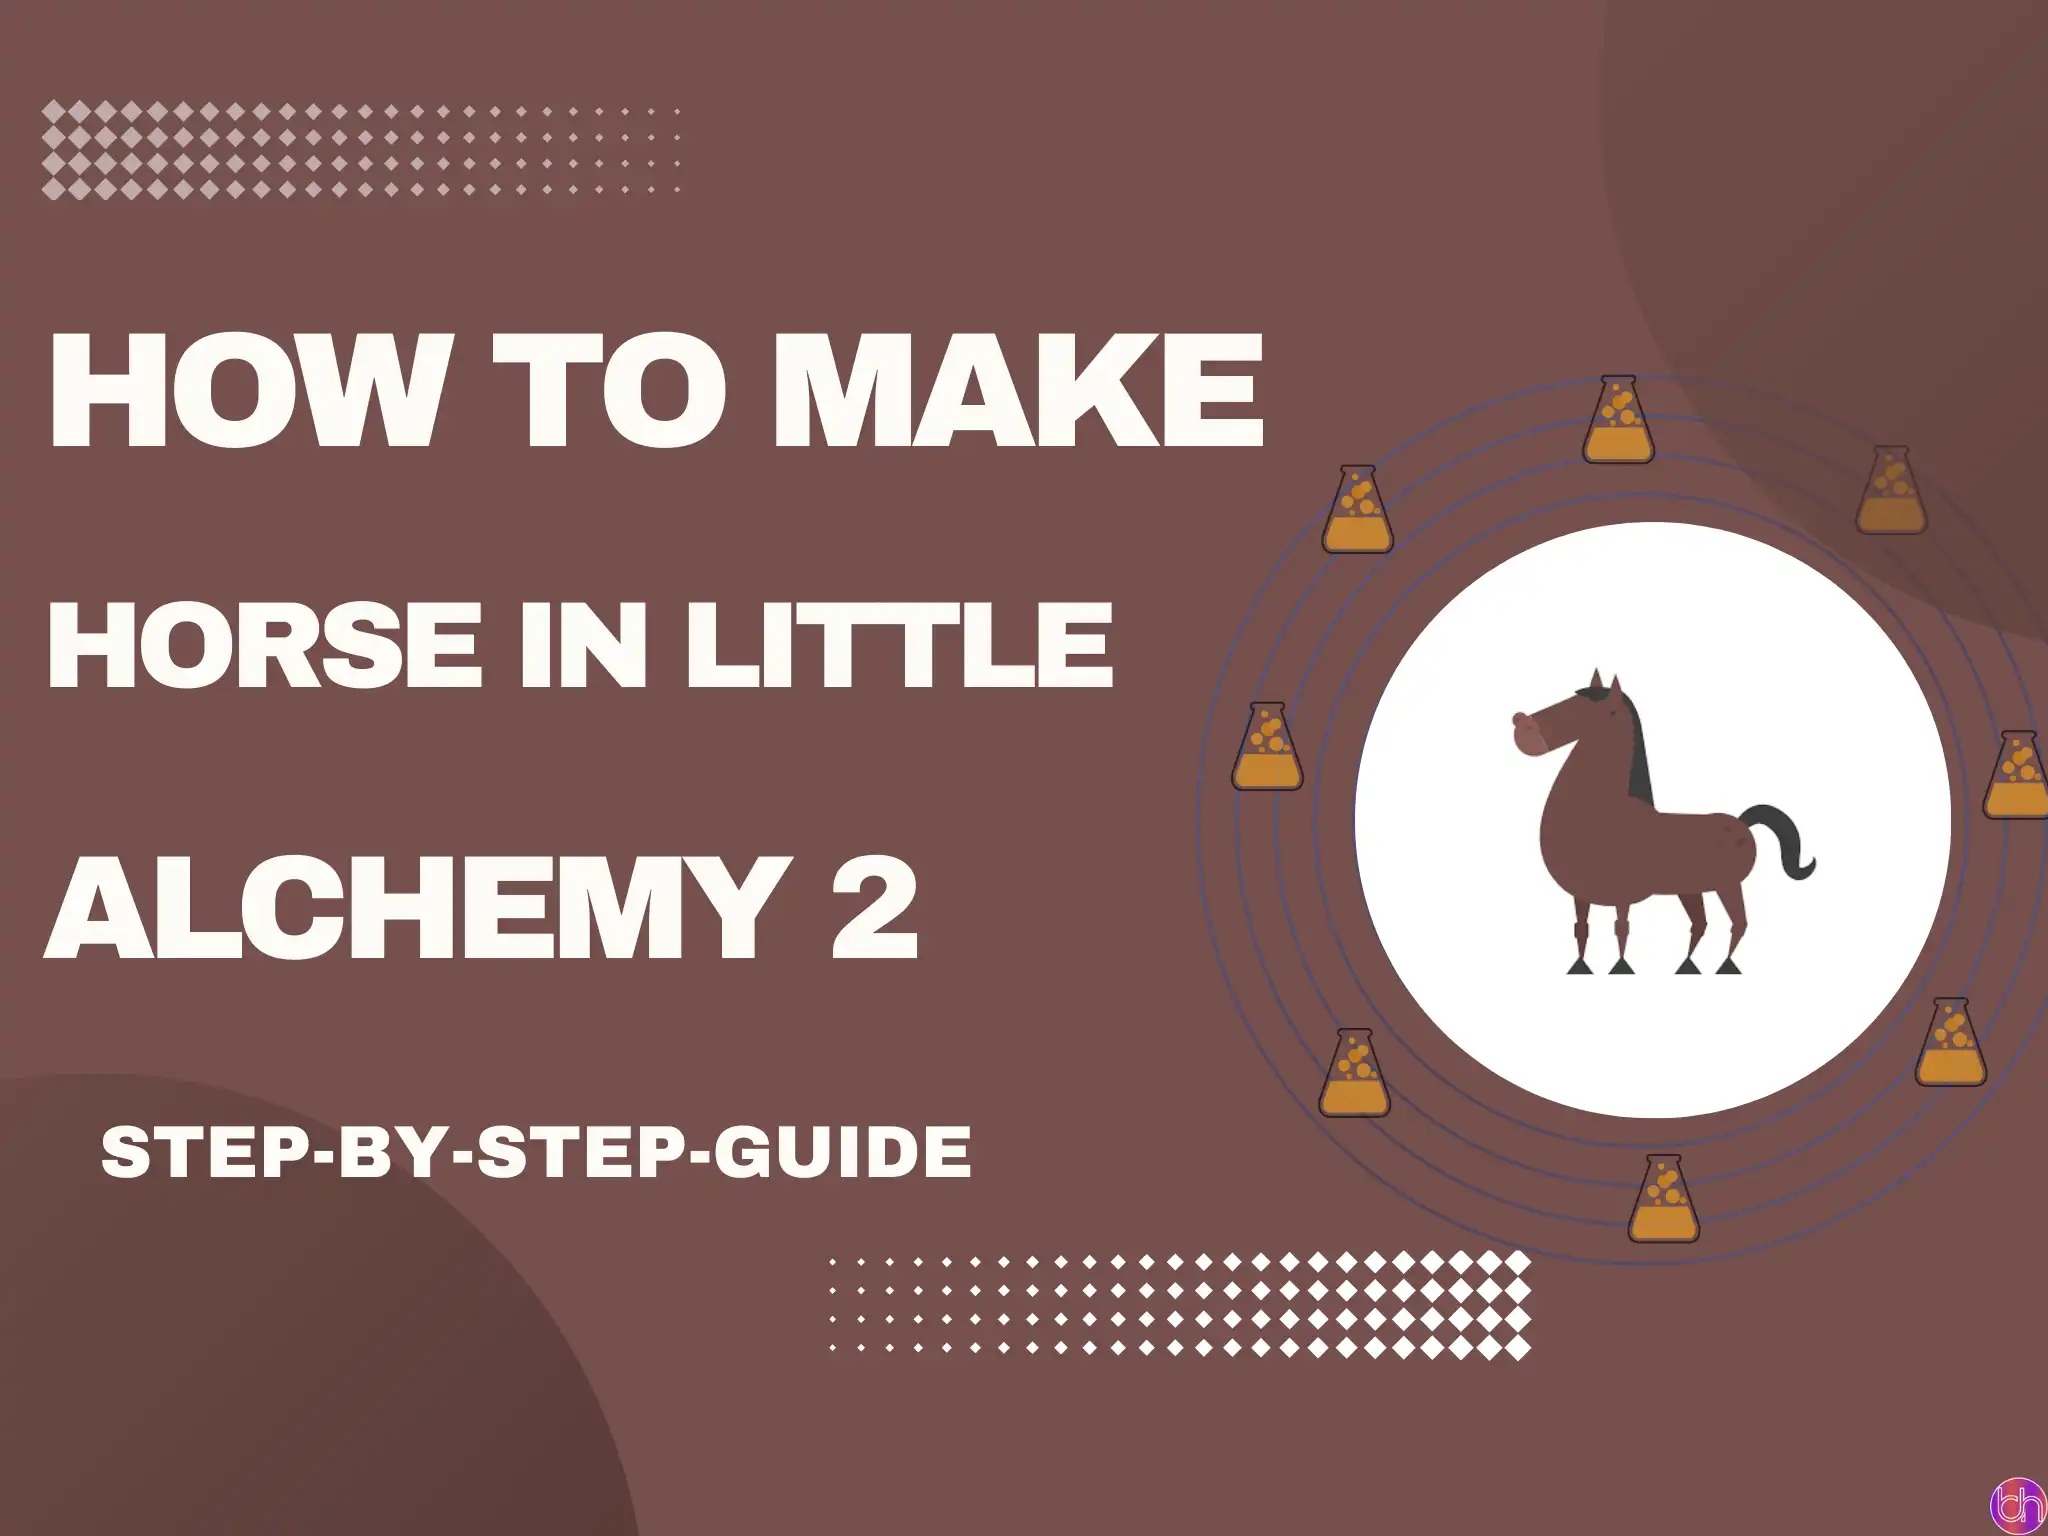 How to make Horse in Little Alchemy 2